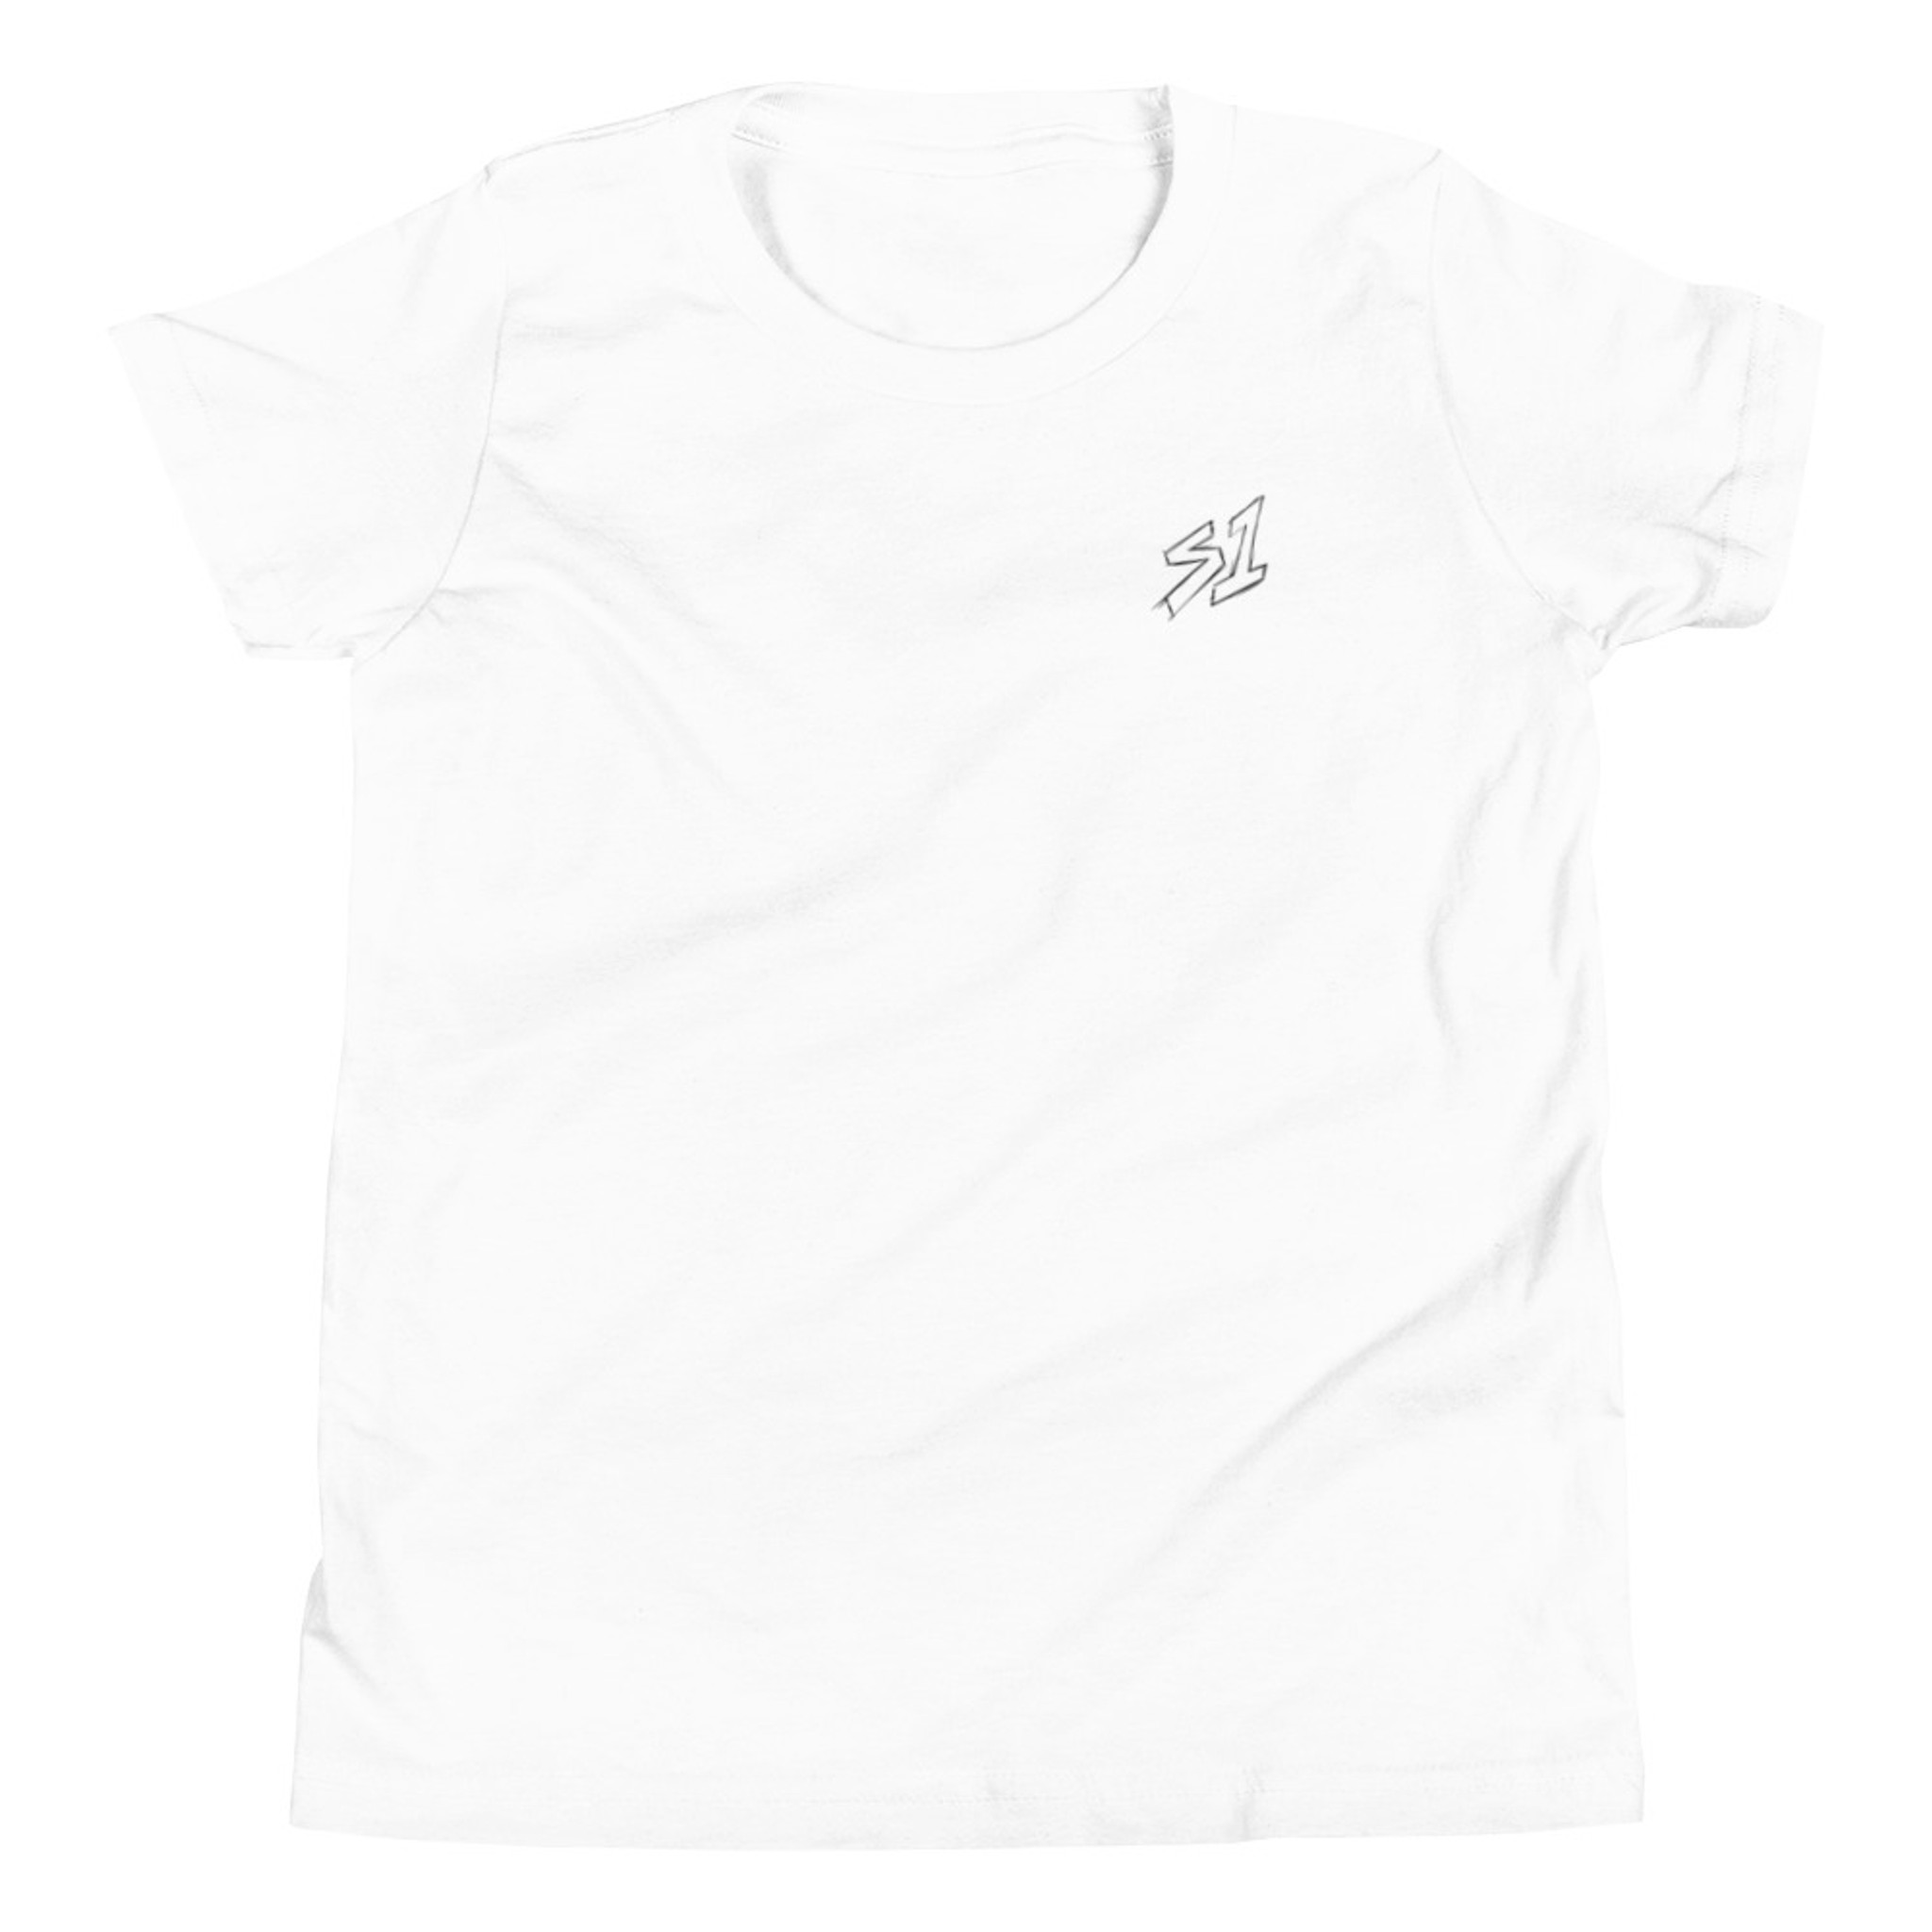 S1 HELMET CO - YOUTH JAY SMITH LAYBACK - COTTON POLY BLEND T-SHIRT - S1 ...